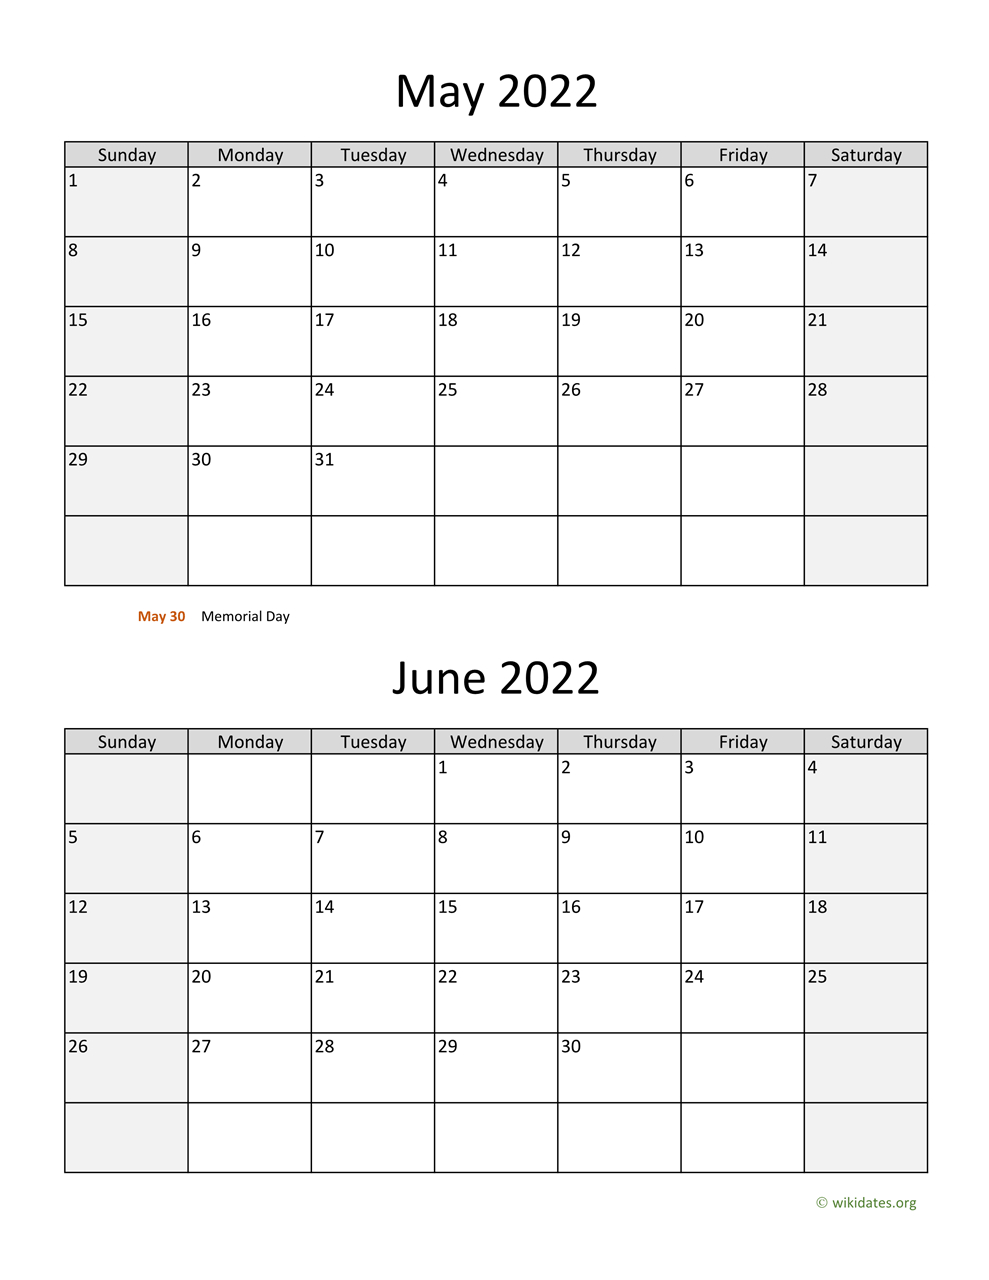 May And June 2022 Calendar | Wikidates